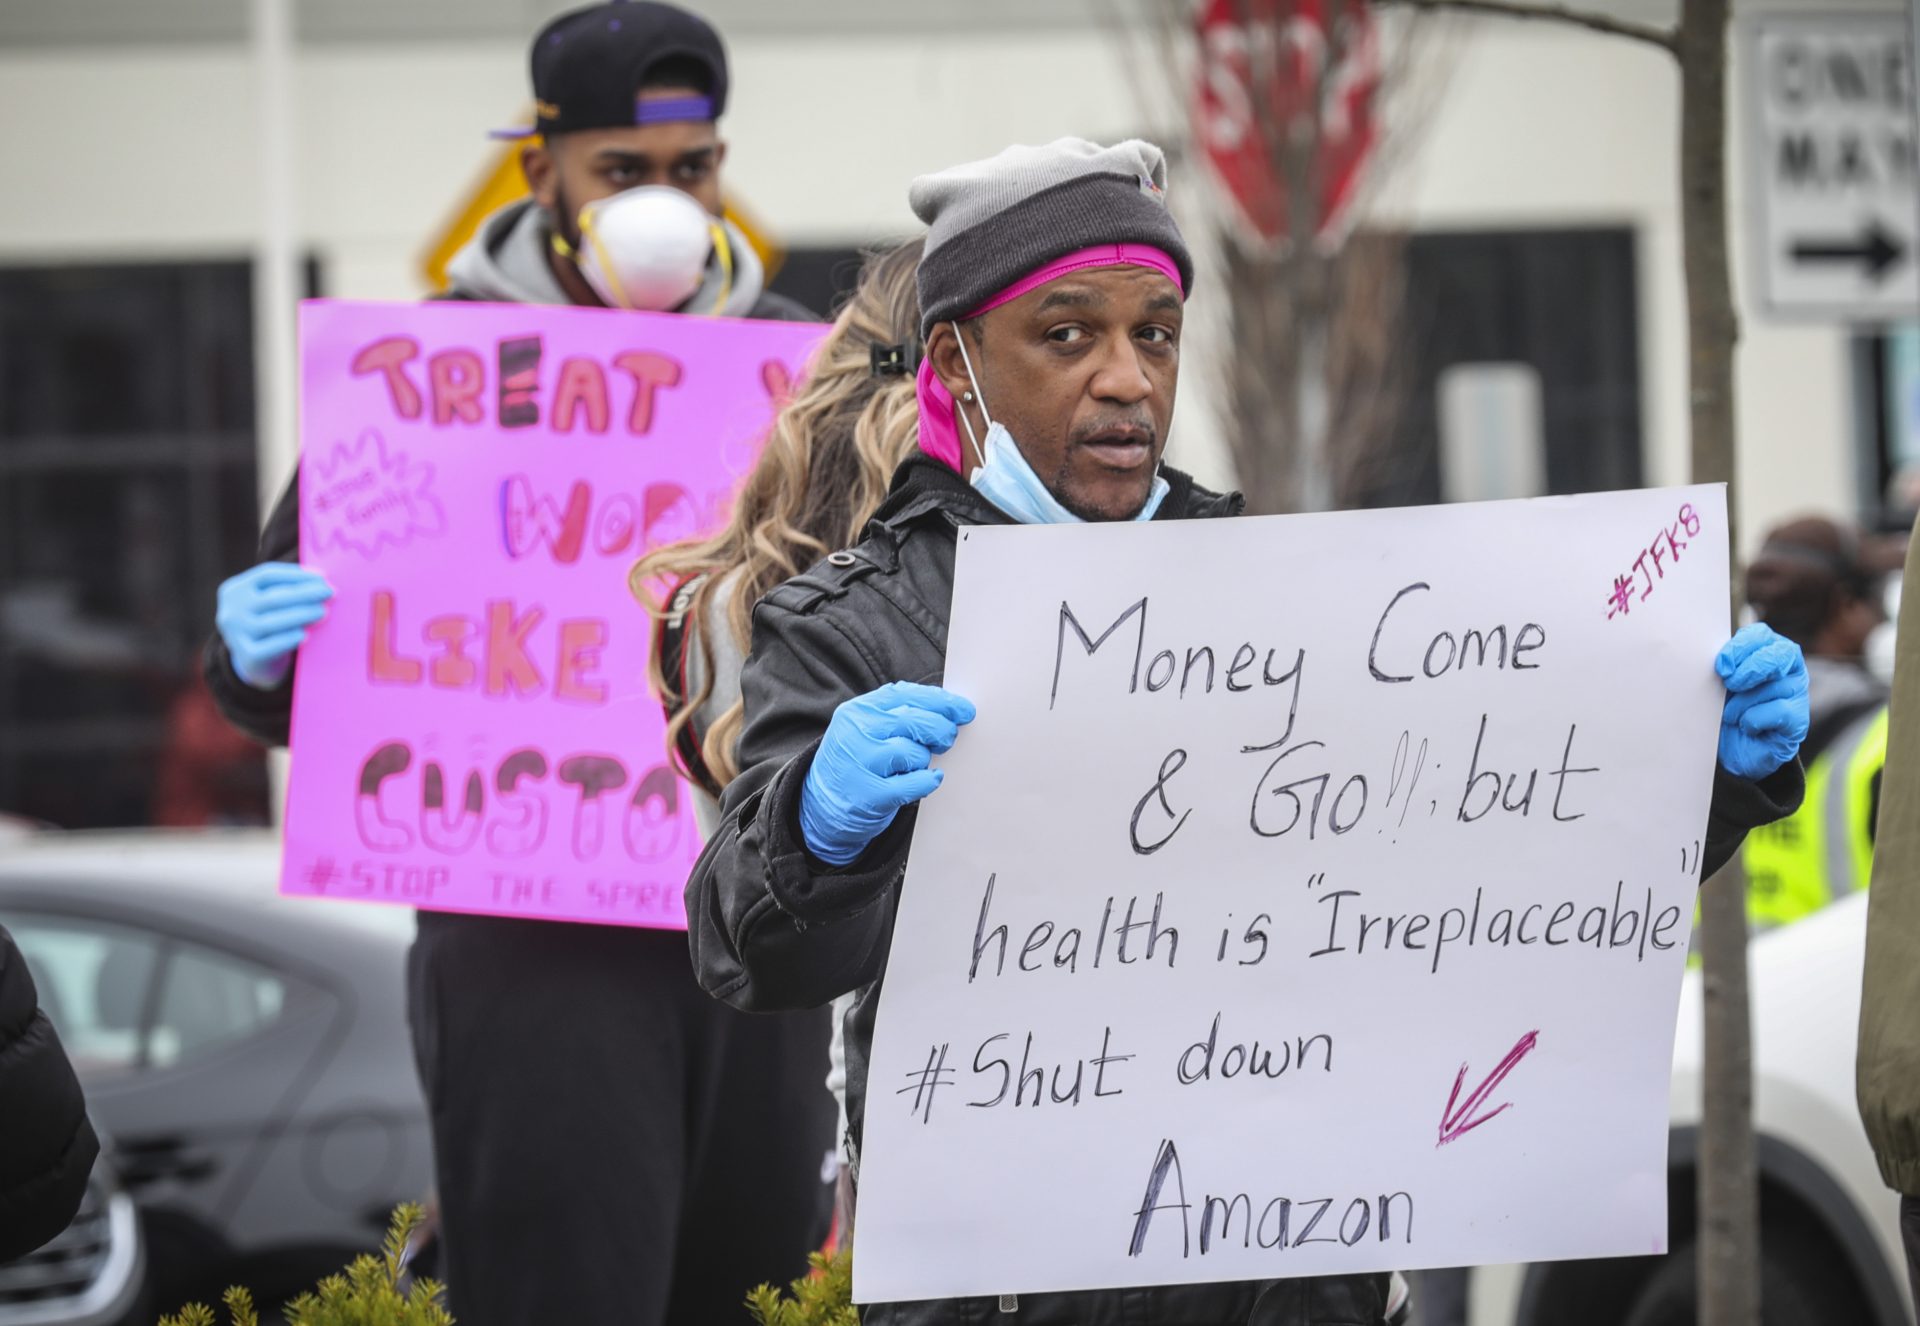 Gerald Bryson, left, join workers at an Amazon fulfillment center in Staten Island, N.Y., protesting conditions in the company's warehouse, Monday March 30, 2020, in New York. Workers say Amazon is not doing enough to to keep workers safe from the spread of COVID-19. "They say we going by CDC standards, but when we call the CDC they are not," said Bryson. "I got grand kids at home, I got kids, I am not doing it."